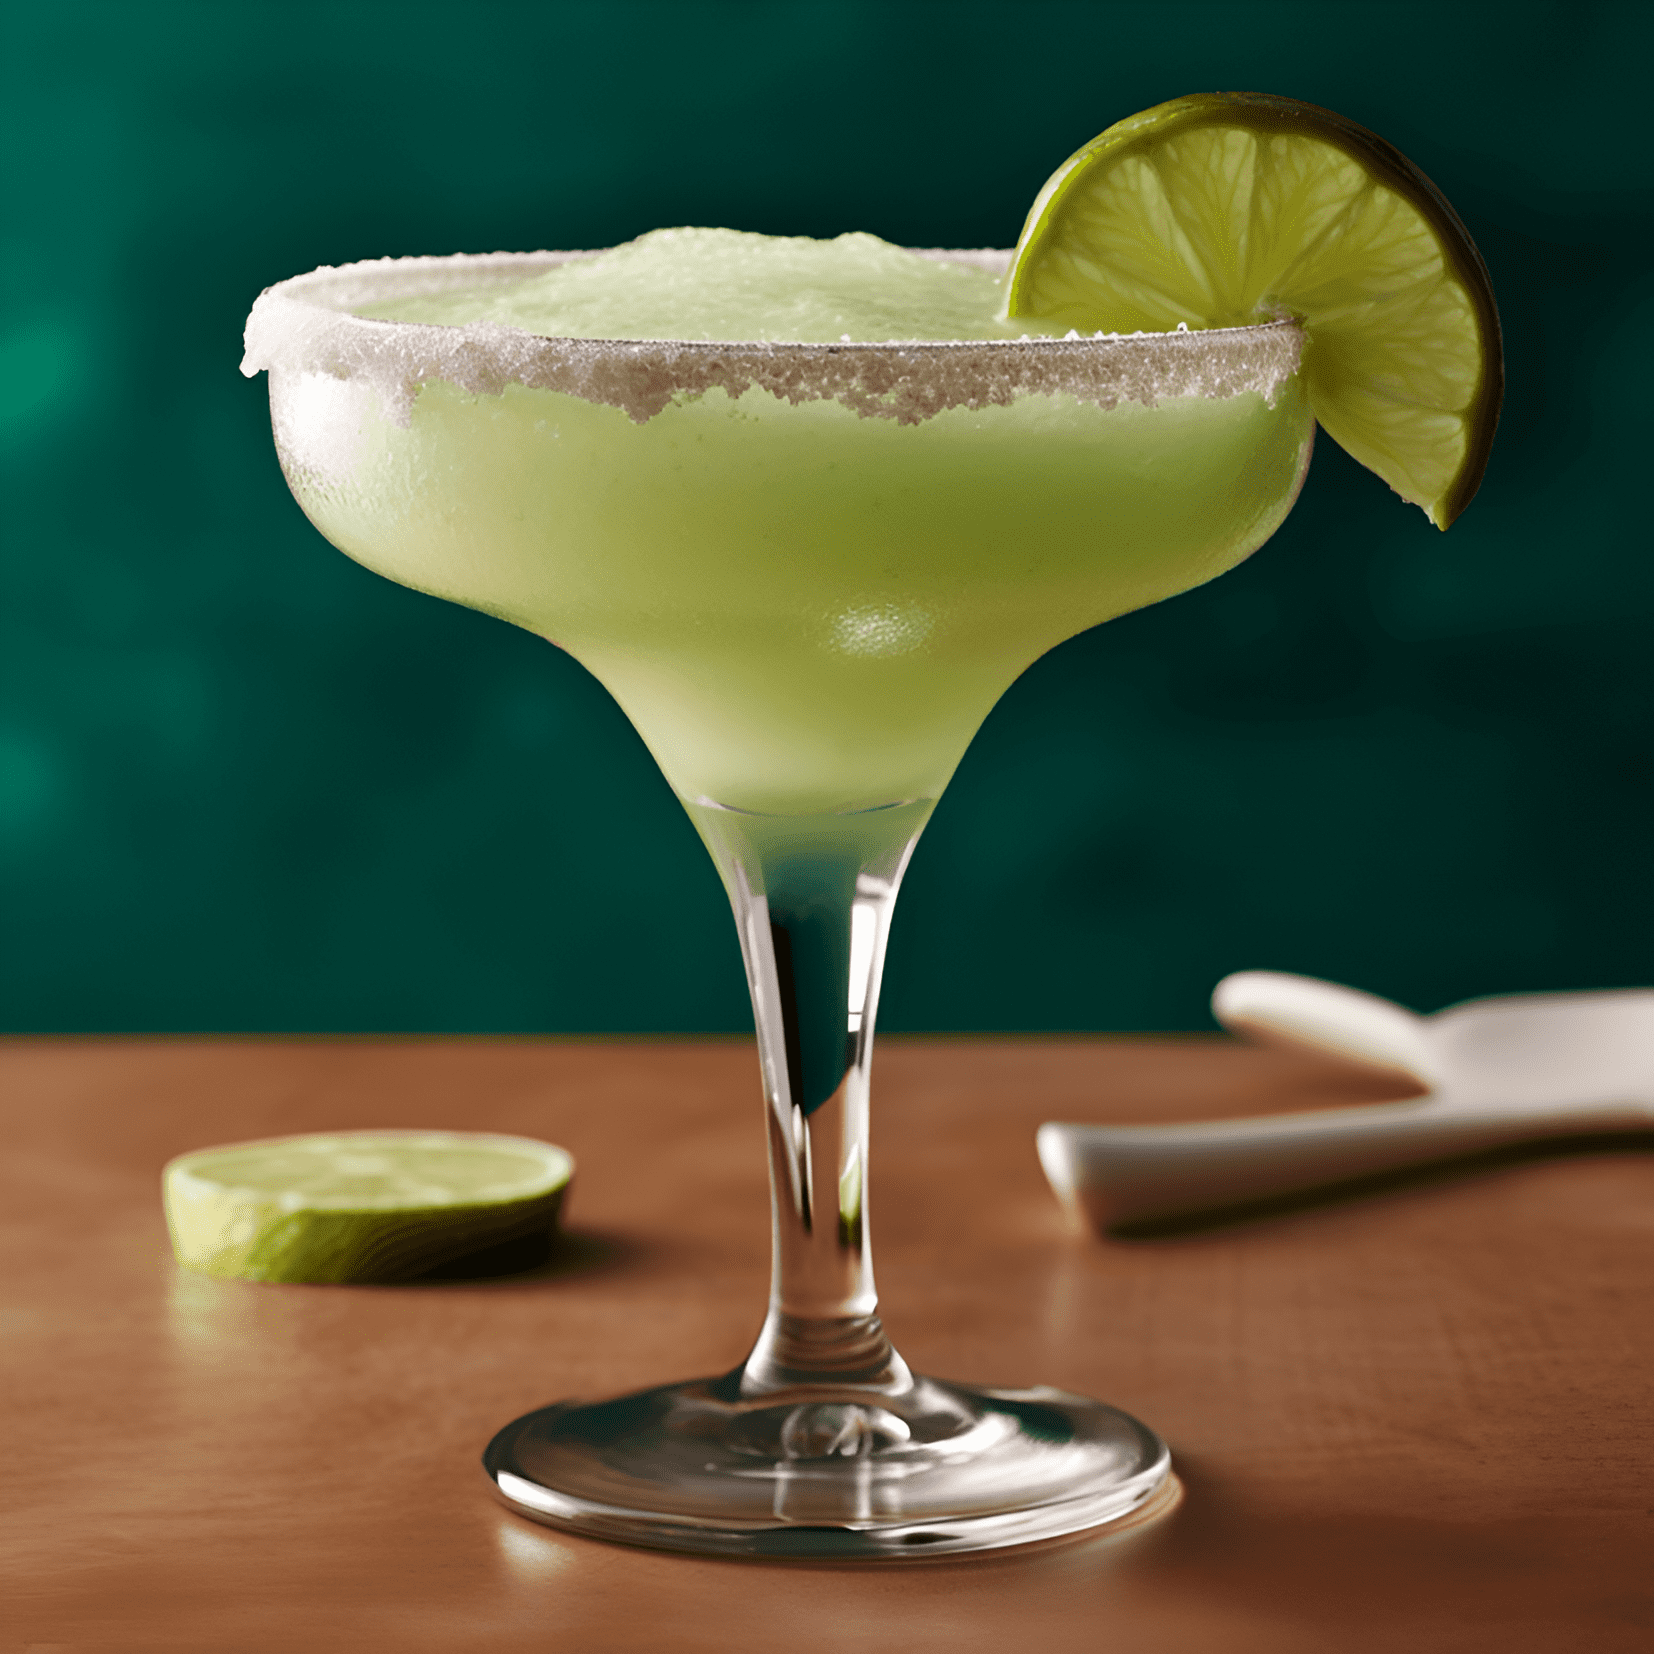 Frozen Margarita Cocktail Recipe - The Frozen Margarita has a refreshing, tangy, and slightly sweet taste. The combination of tequila, lime juice, and orange liqueur creates a well-balanced flavor profile that is both strong and smooth.